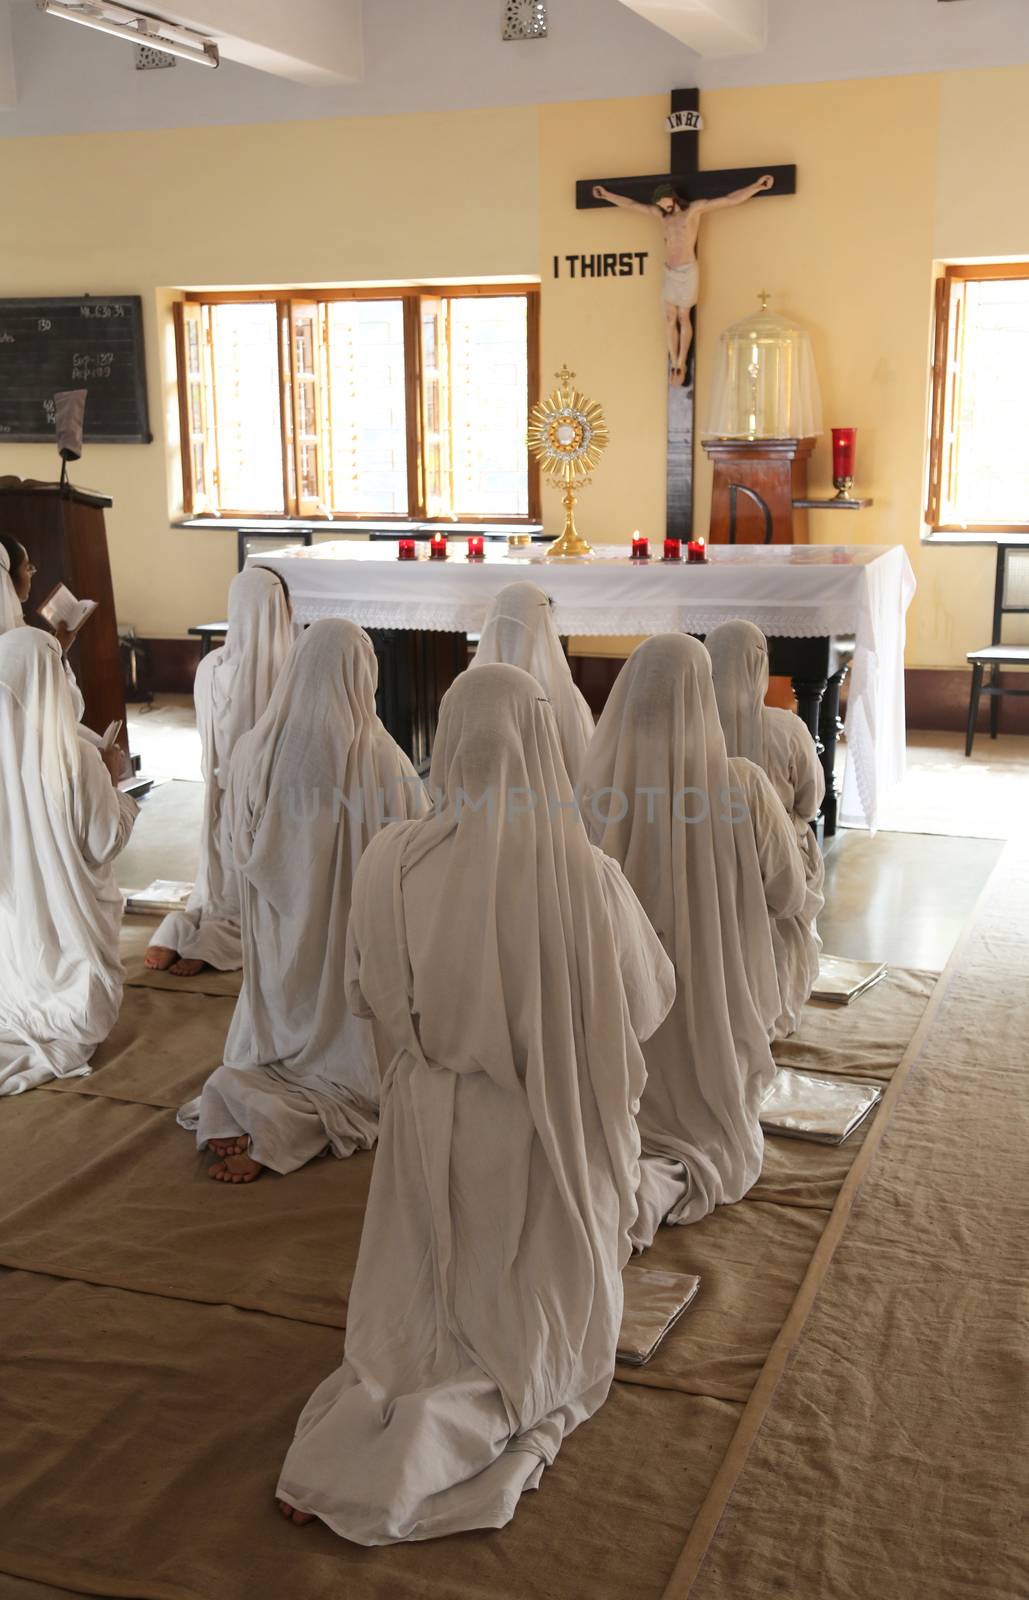 Sisters of Mother Teresa's Missionaries of Charity in prayer in the chapel of the Mother House, Kolkata by atlas